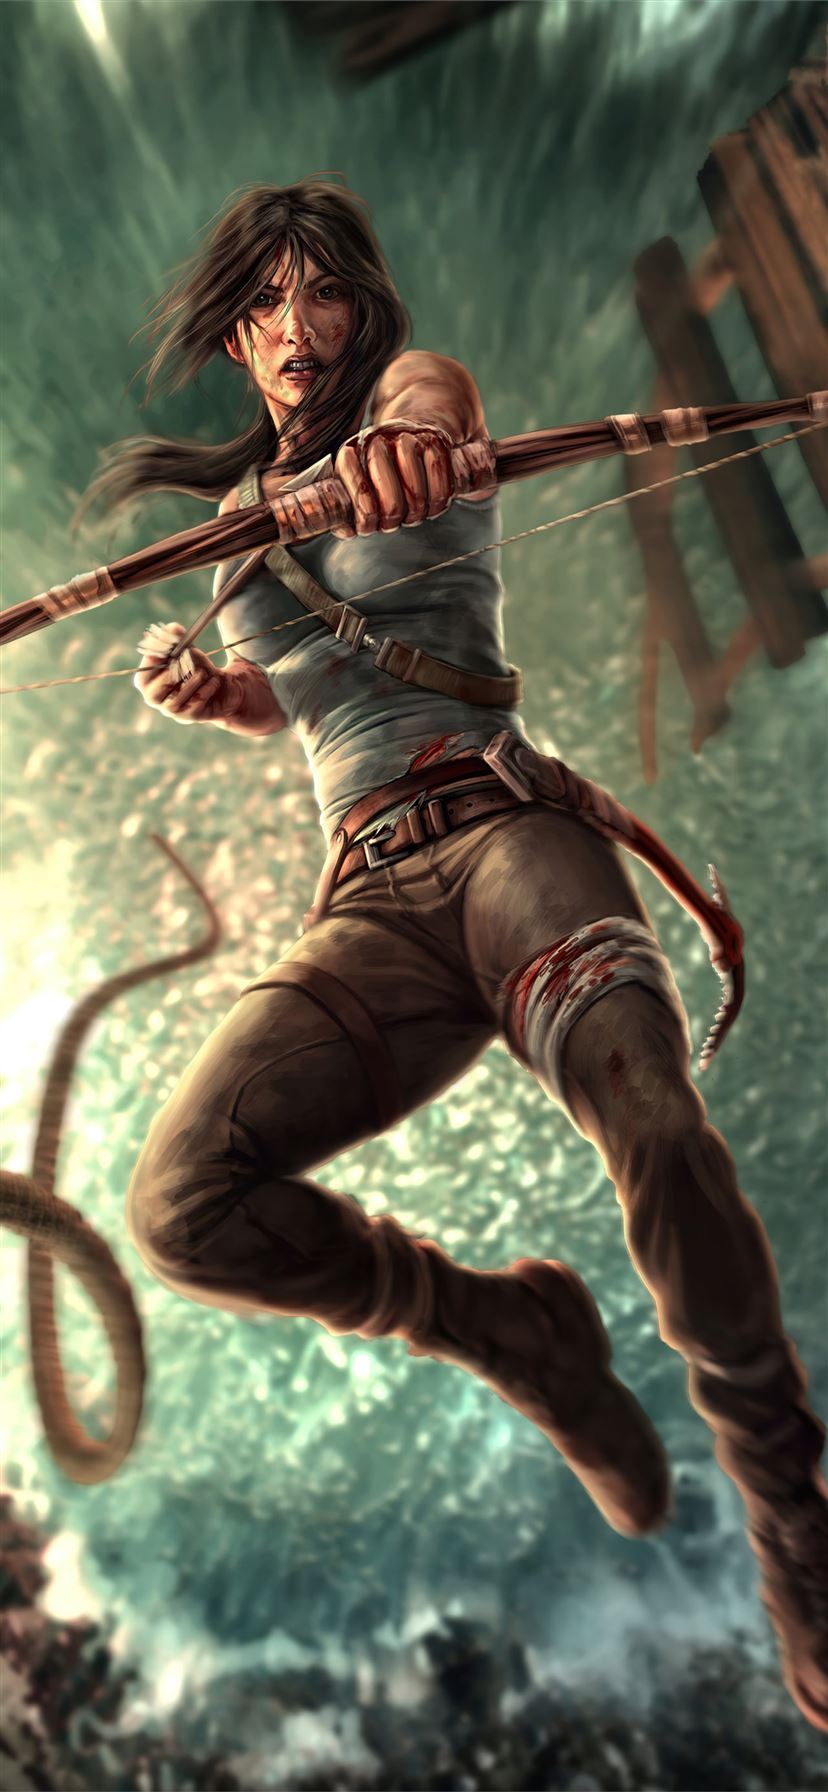 lara croft with bow and arrow iPhone 11 wallpaper 